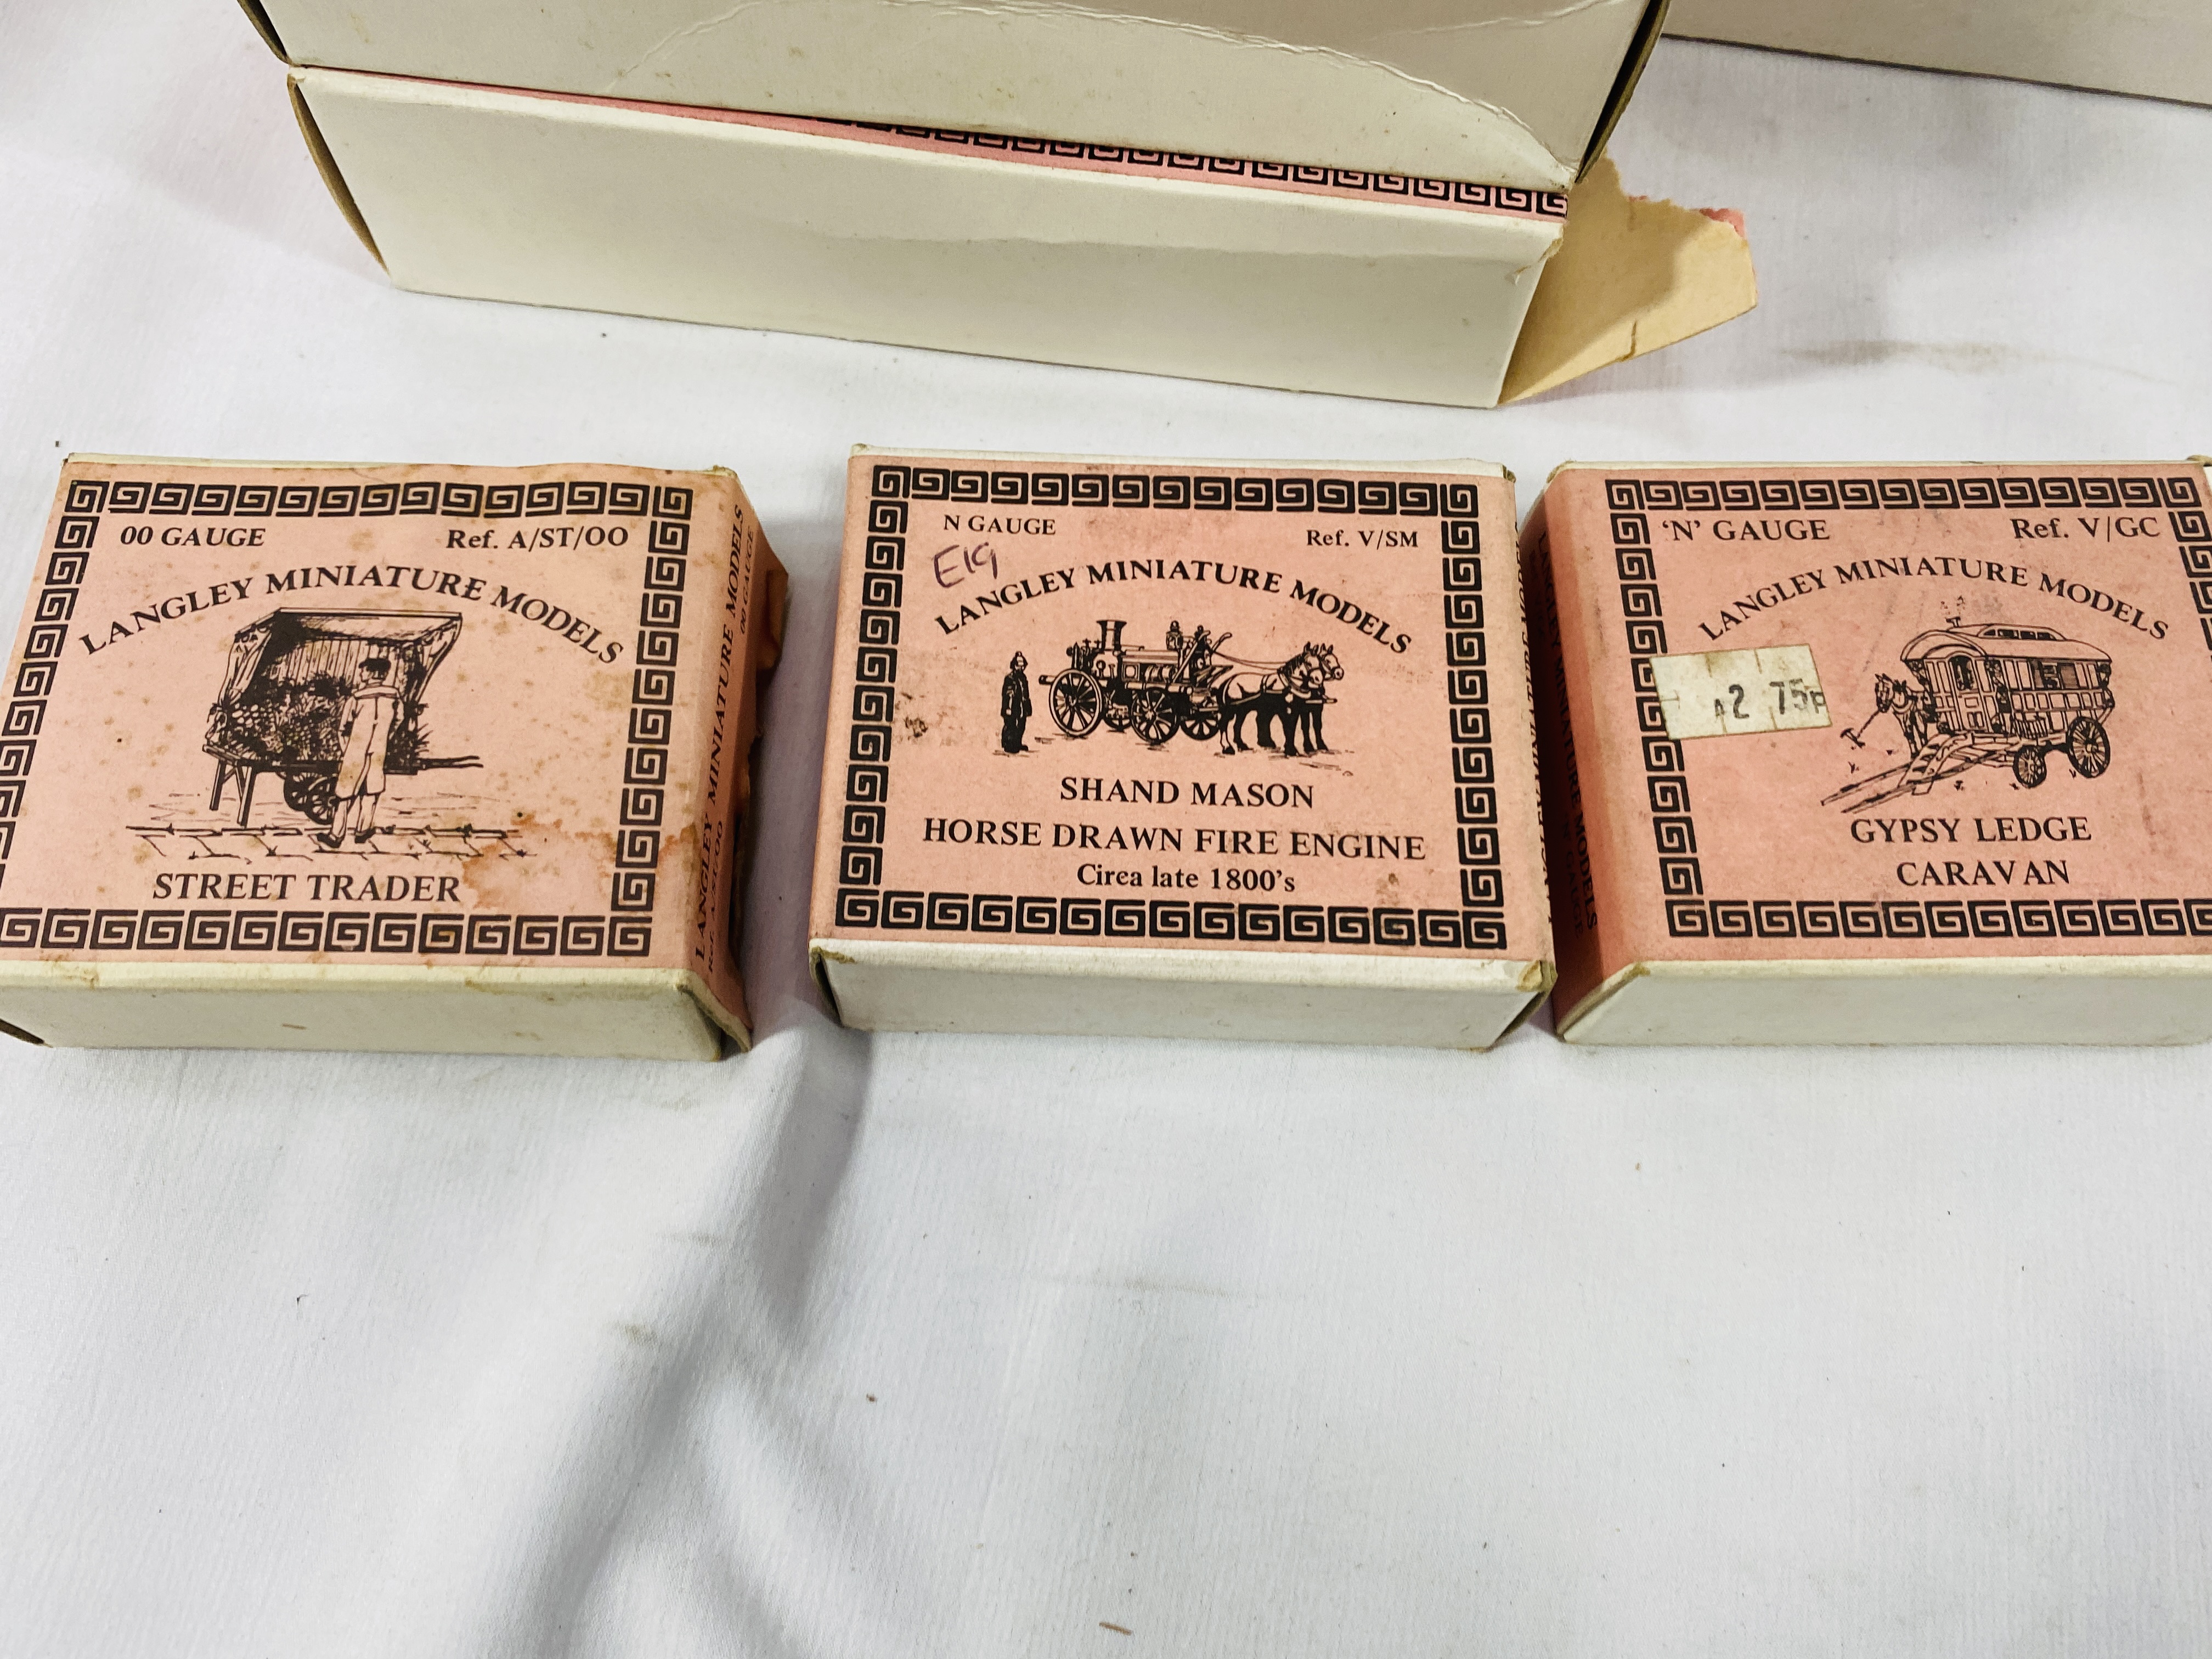 24 boxed Langley Miniature Models. - Image 2 of 4